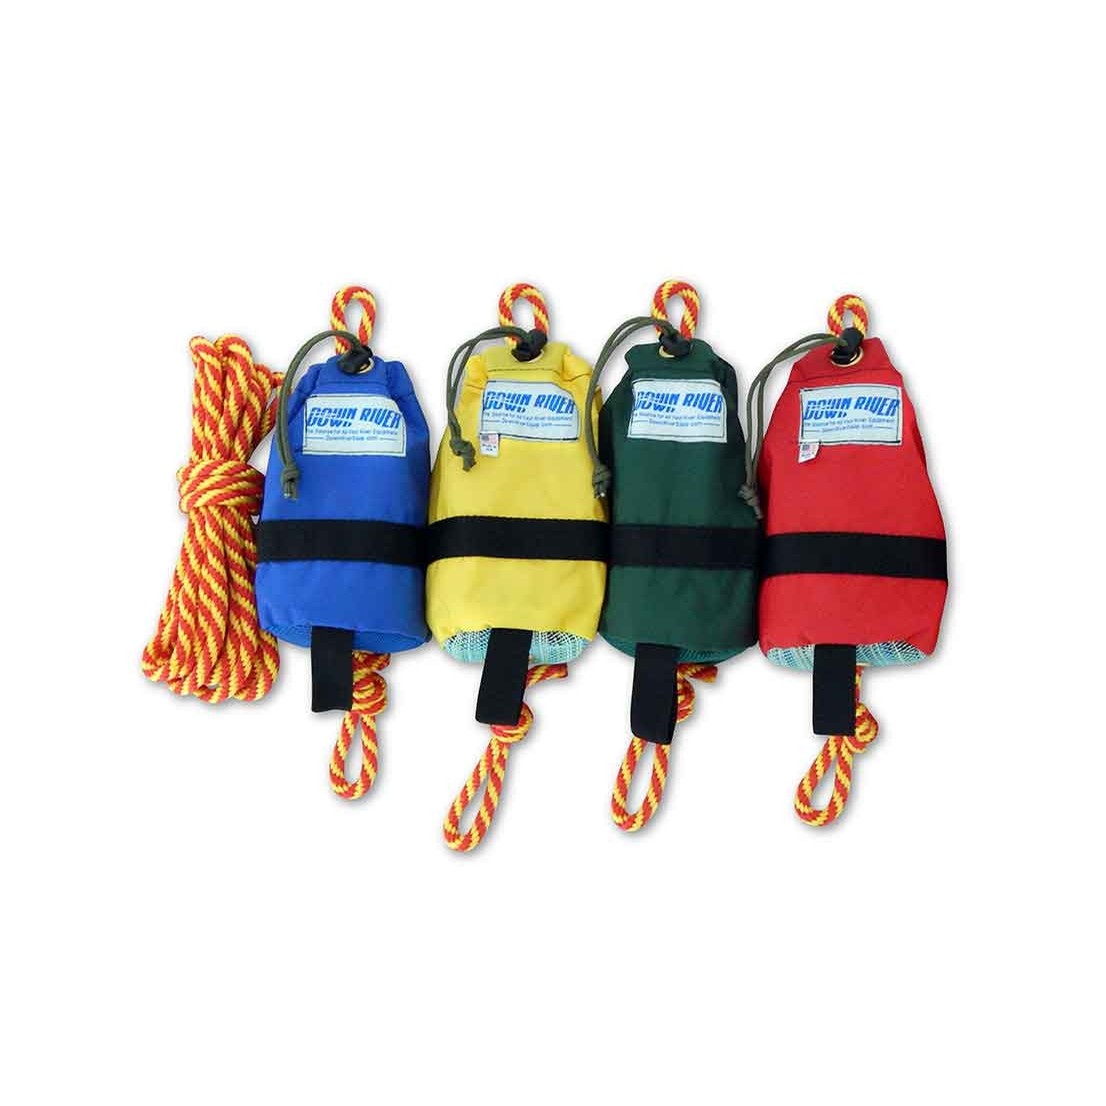 https://www.companybe.com/DownRiverEquipment/product_photos/rd_images/rd_Flip-Line-Bags-With-Rope-No-Orange-Bag.jpg